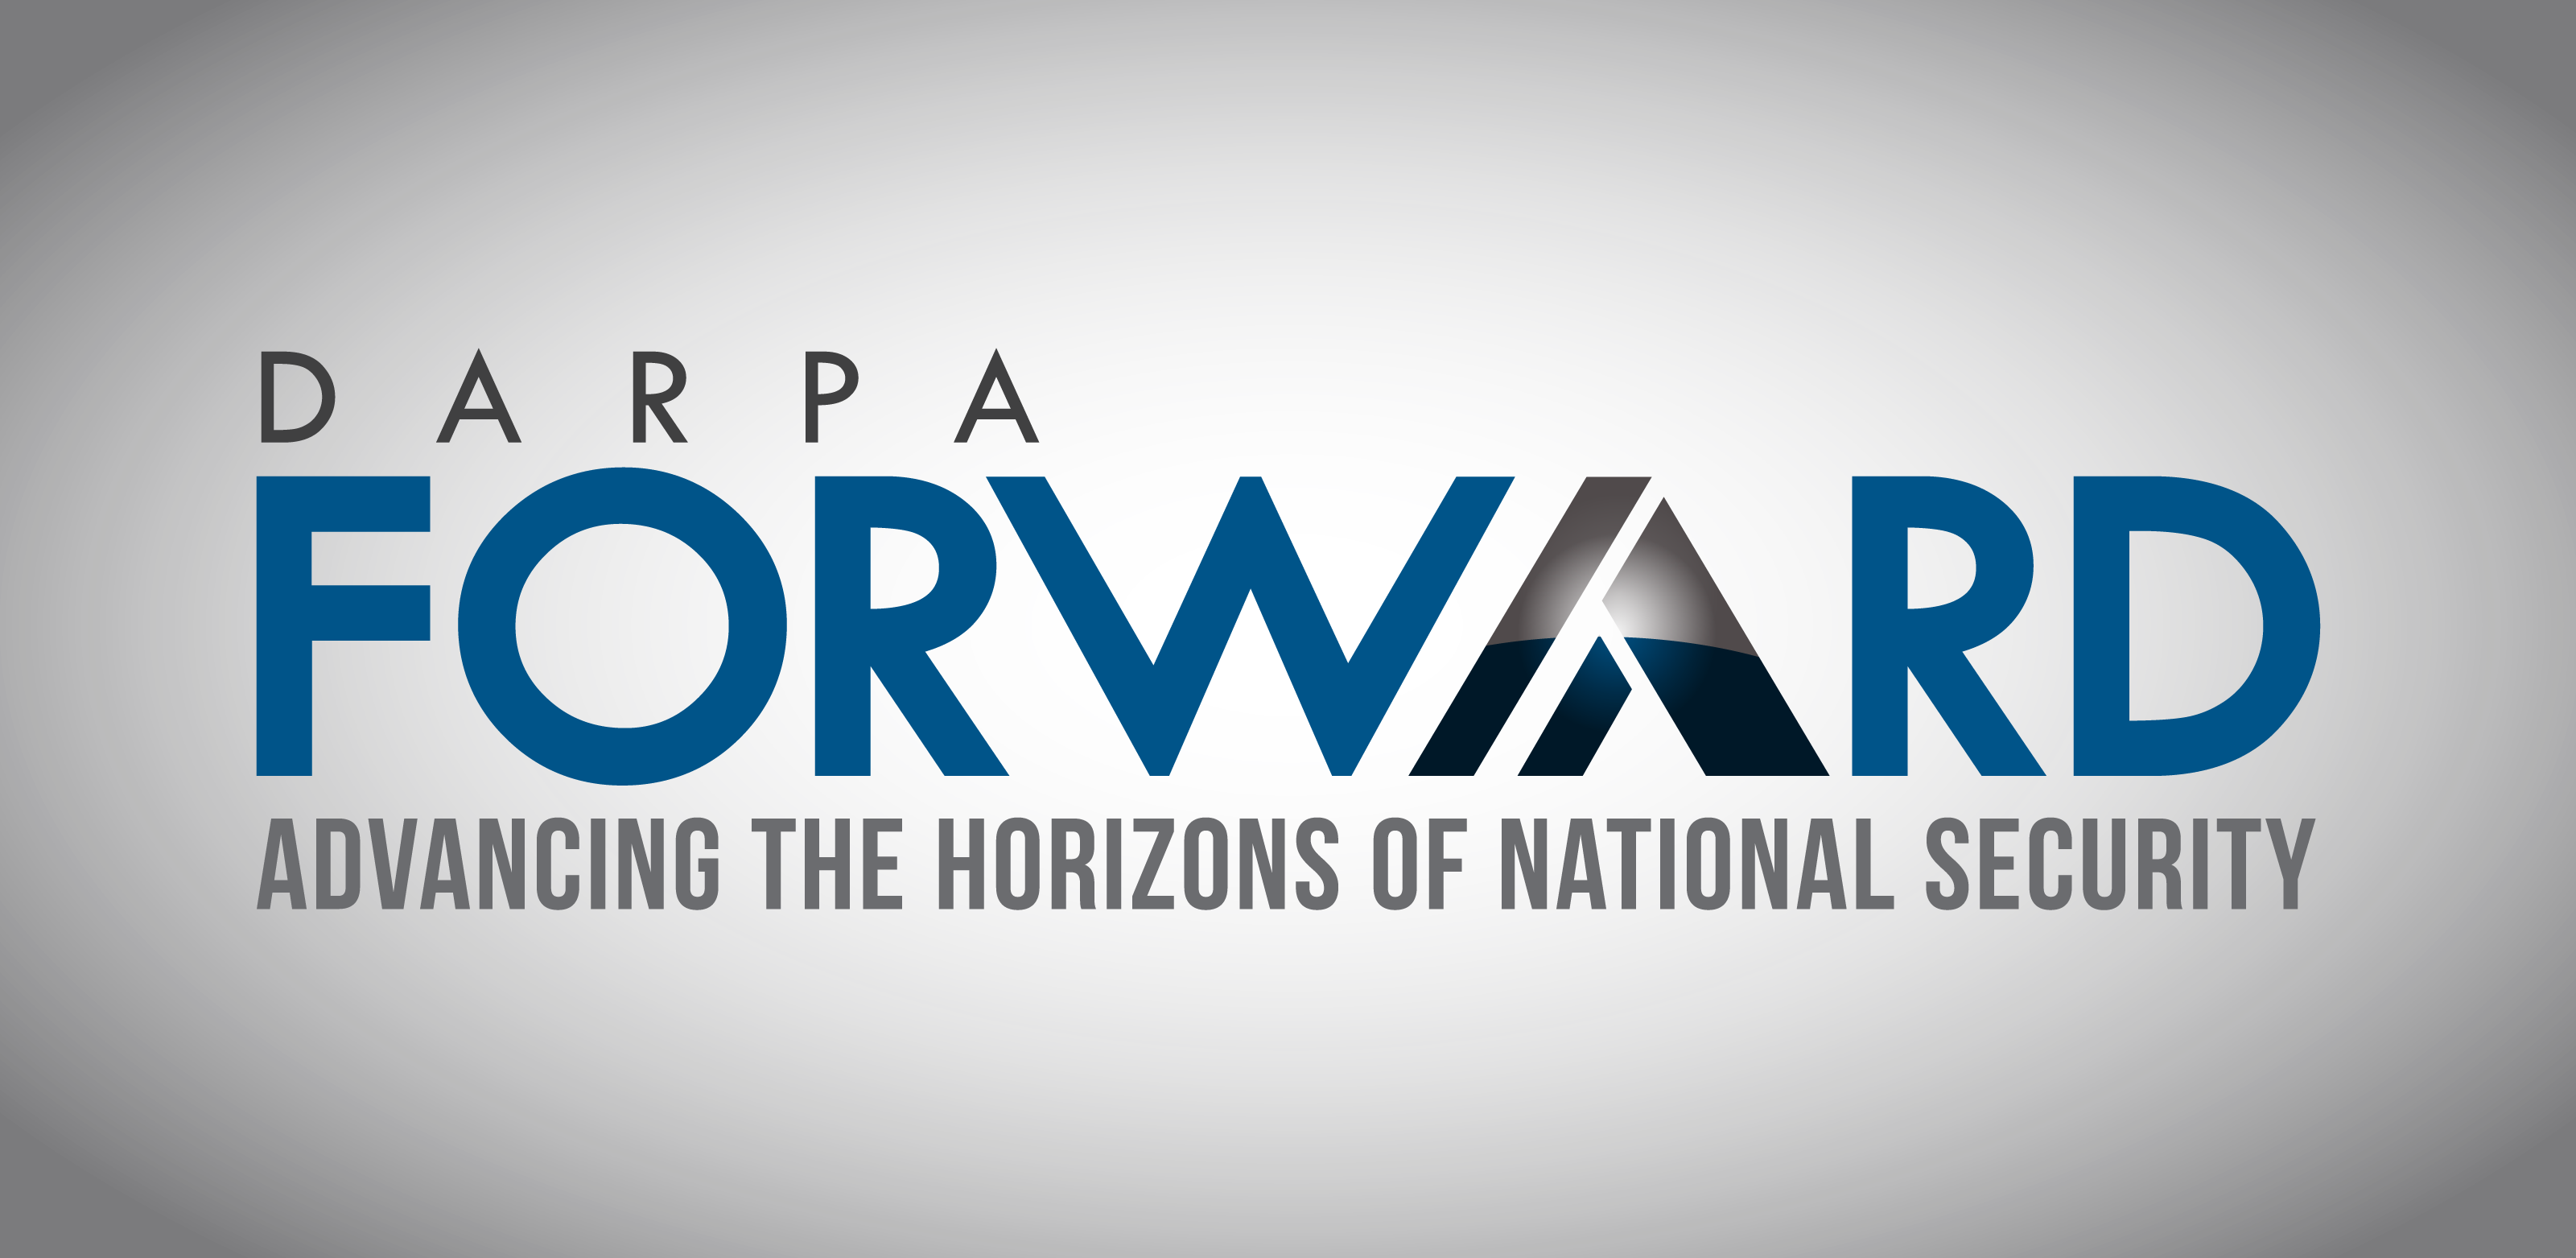 DARPA Forward conference series